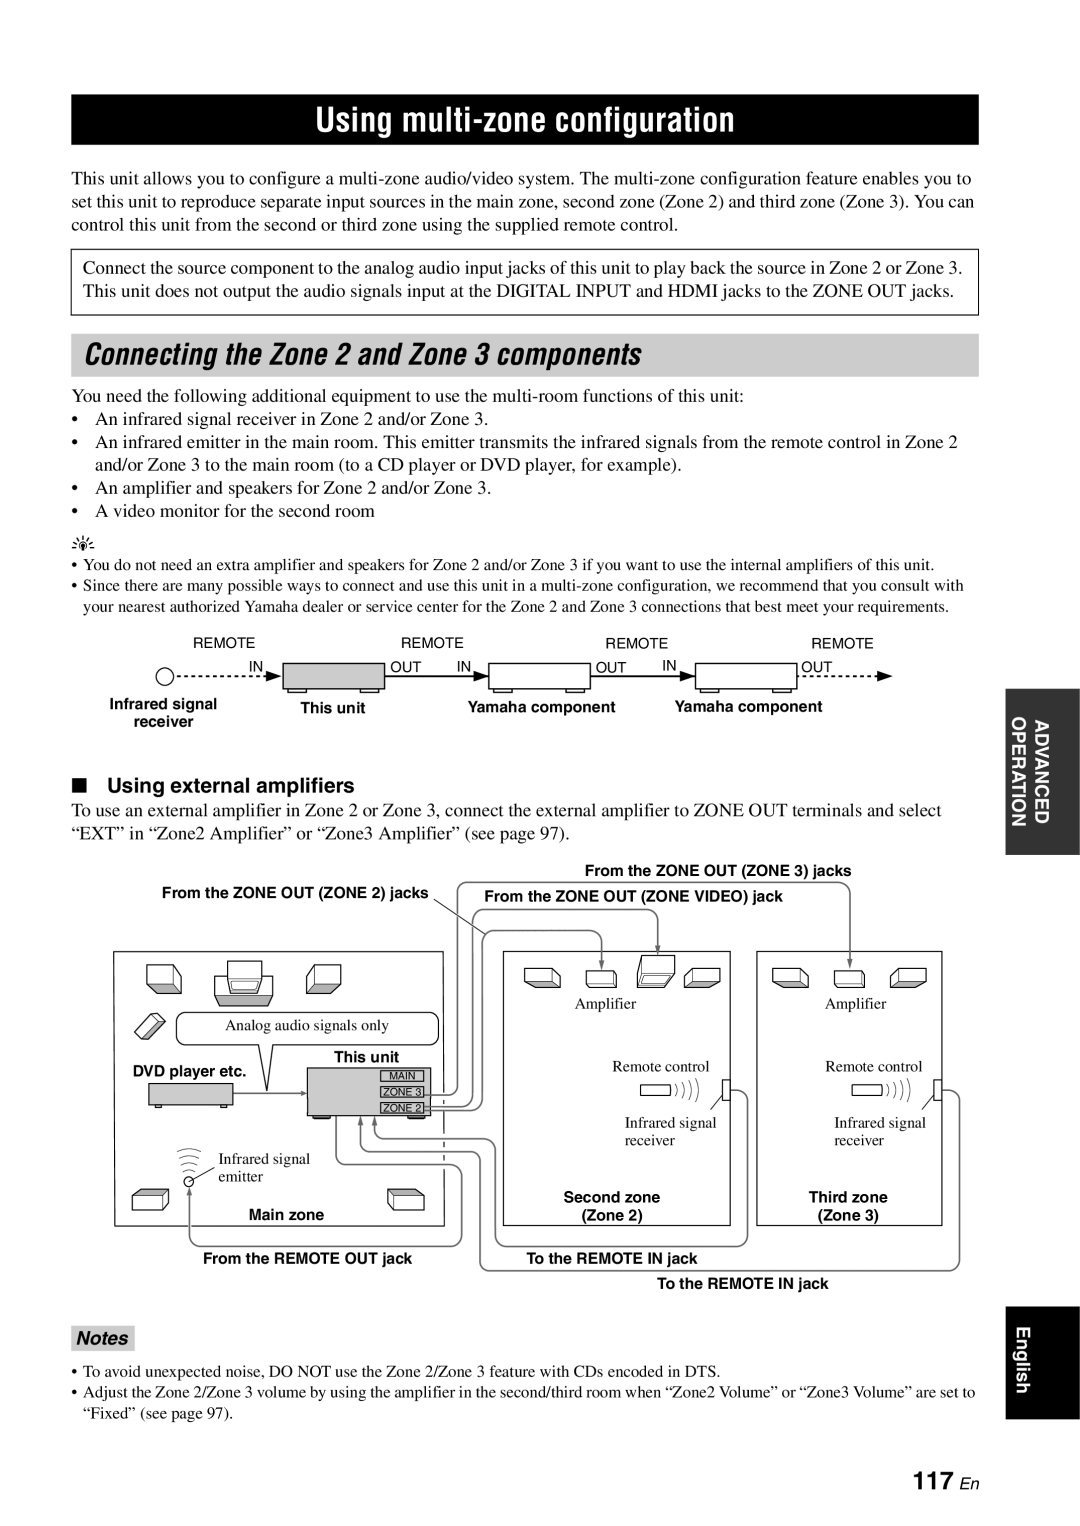 Yamaha RX-V3800 owner manual Using multi-zone configuration, Connecting the Zone 2 and Zone 3 components, 117 En 